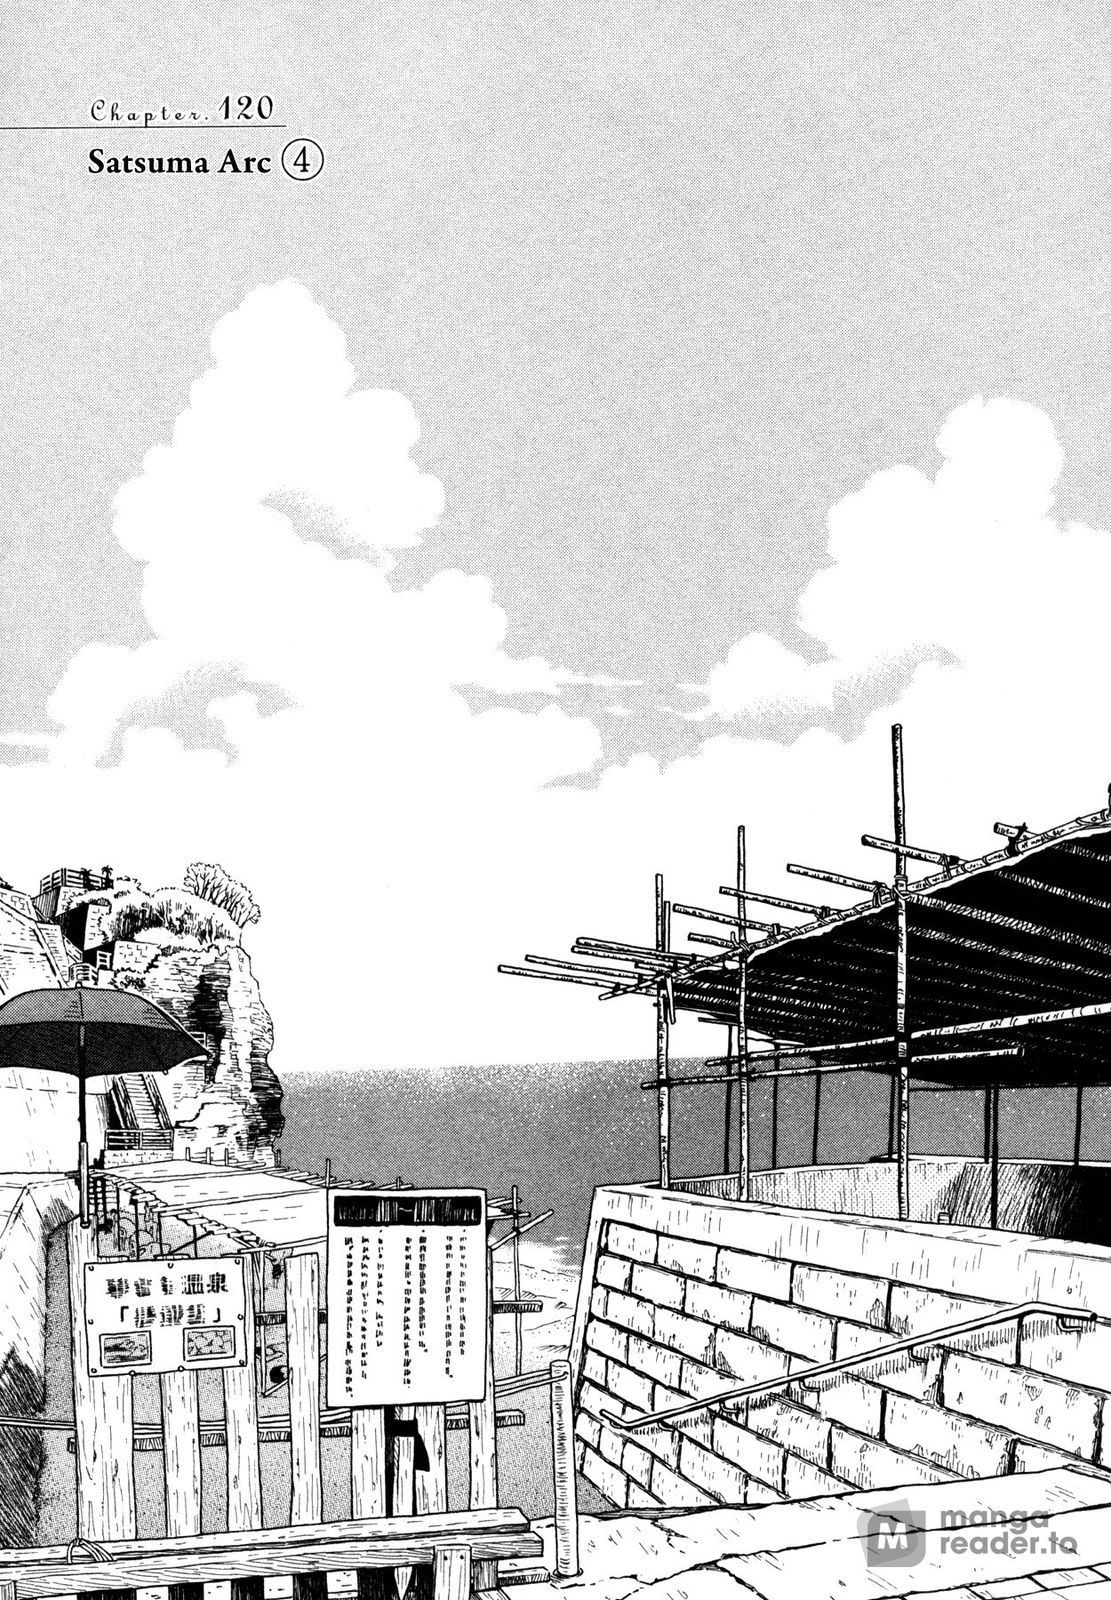 March Comes in Like a Lion, Chapter 120 The Satsuma Arc (Part 4) (EN) image 01